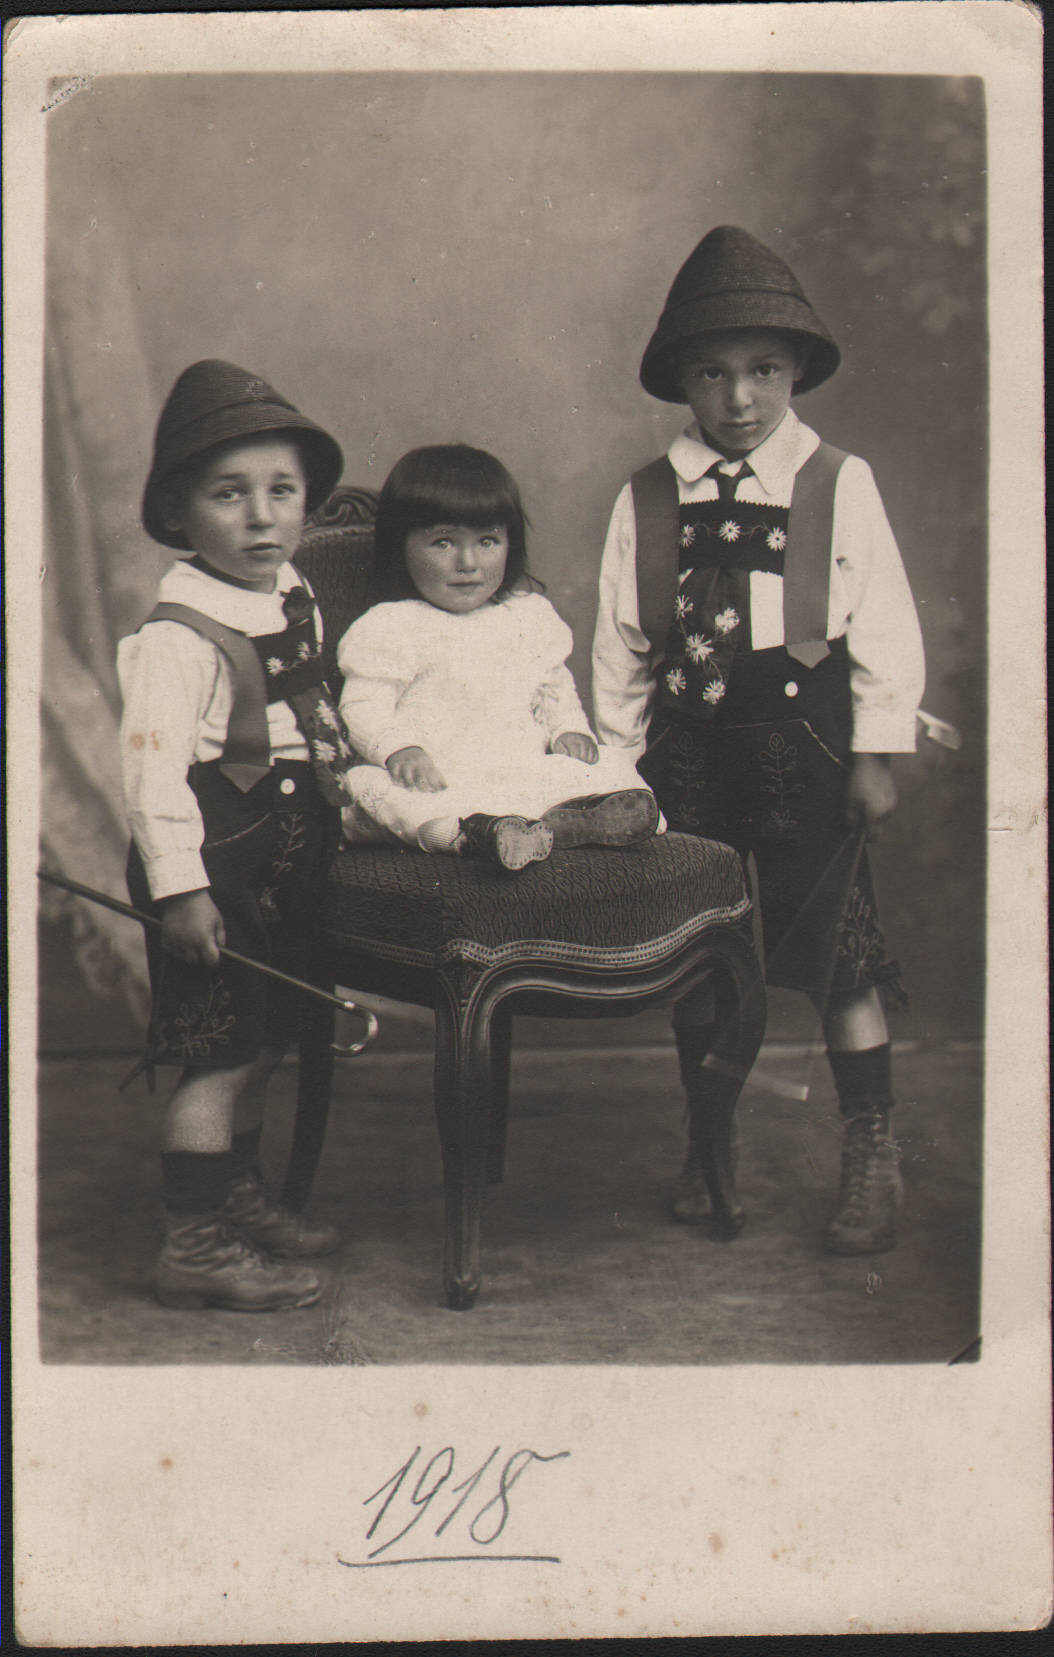 Elsie with brothers Ludwig and Ferdinand as children in 1918